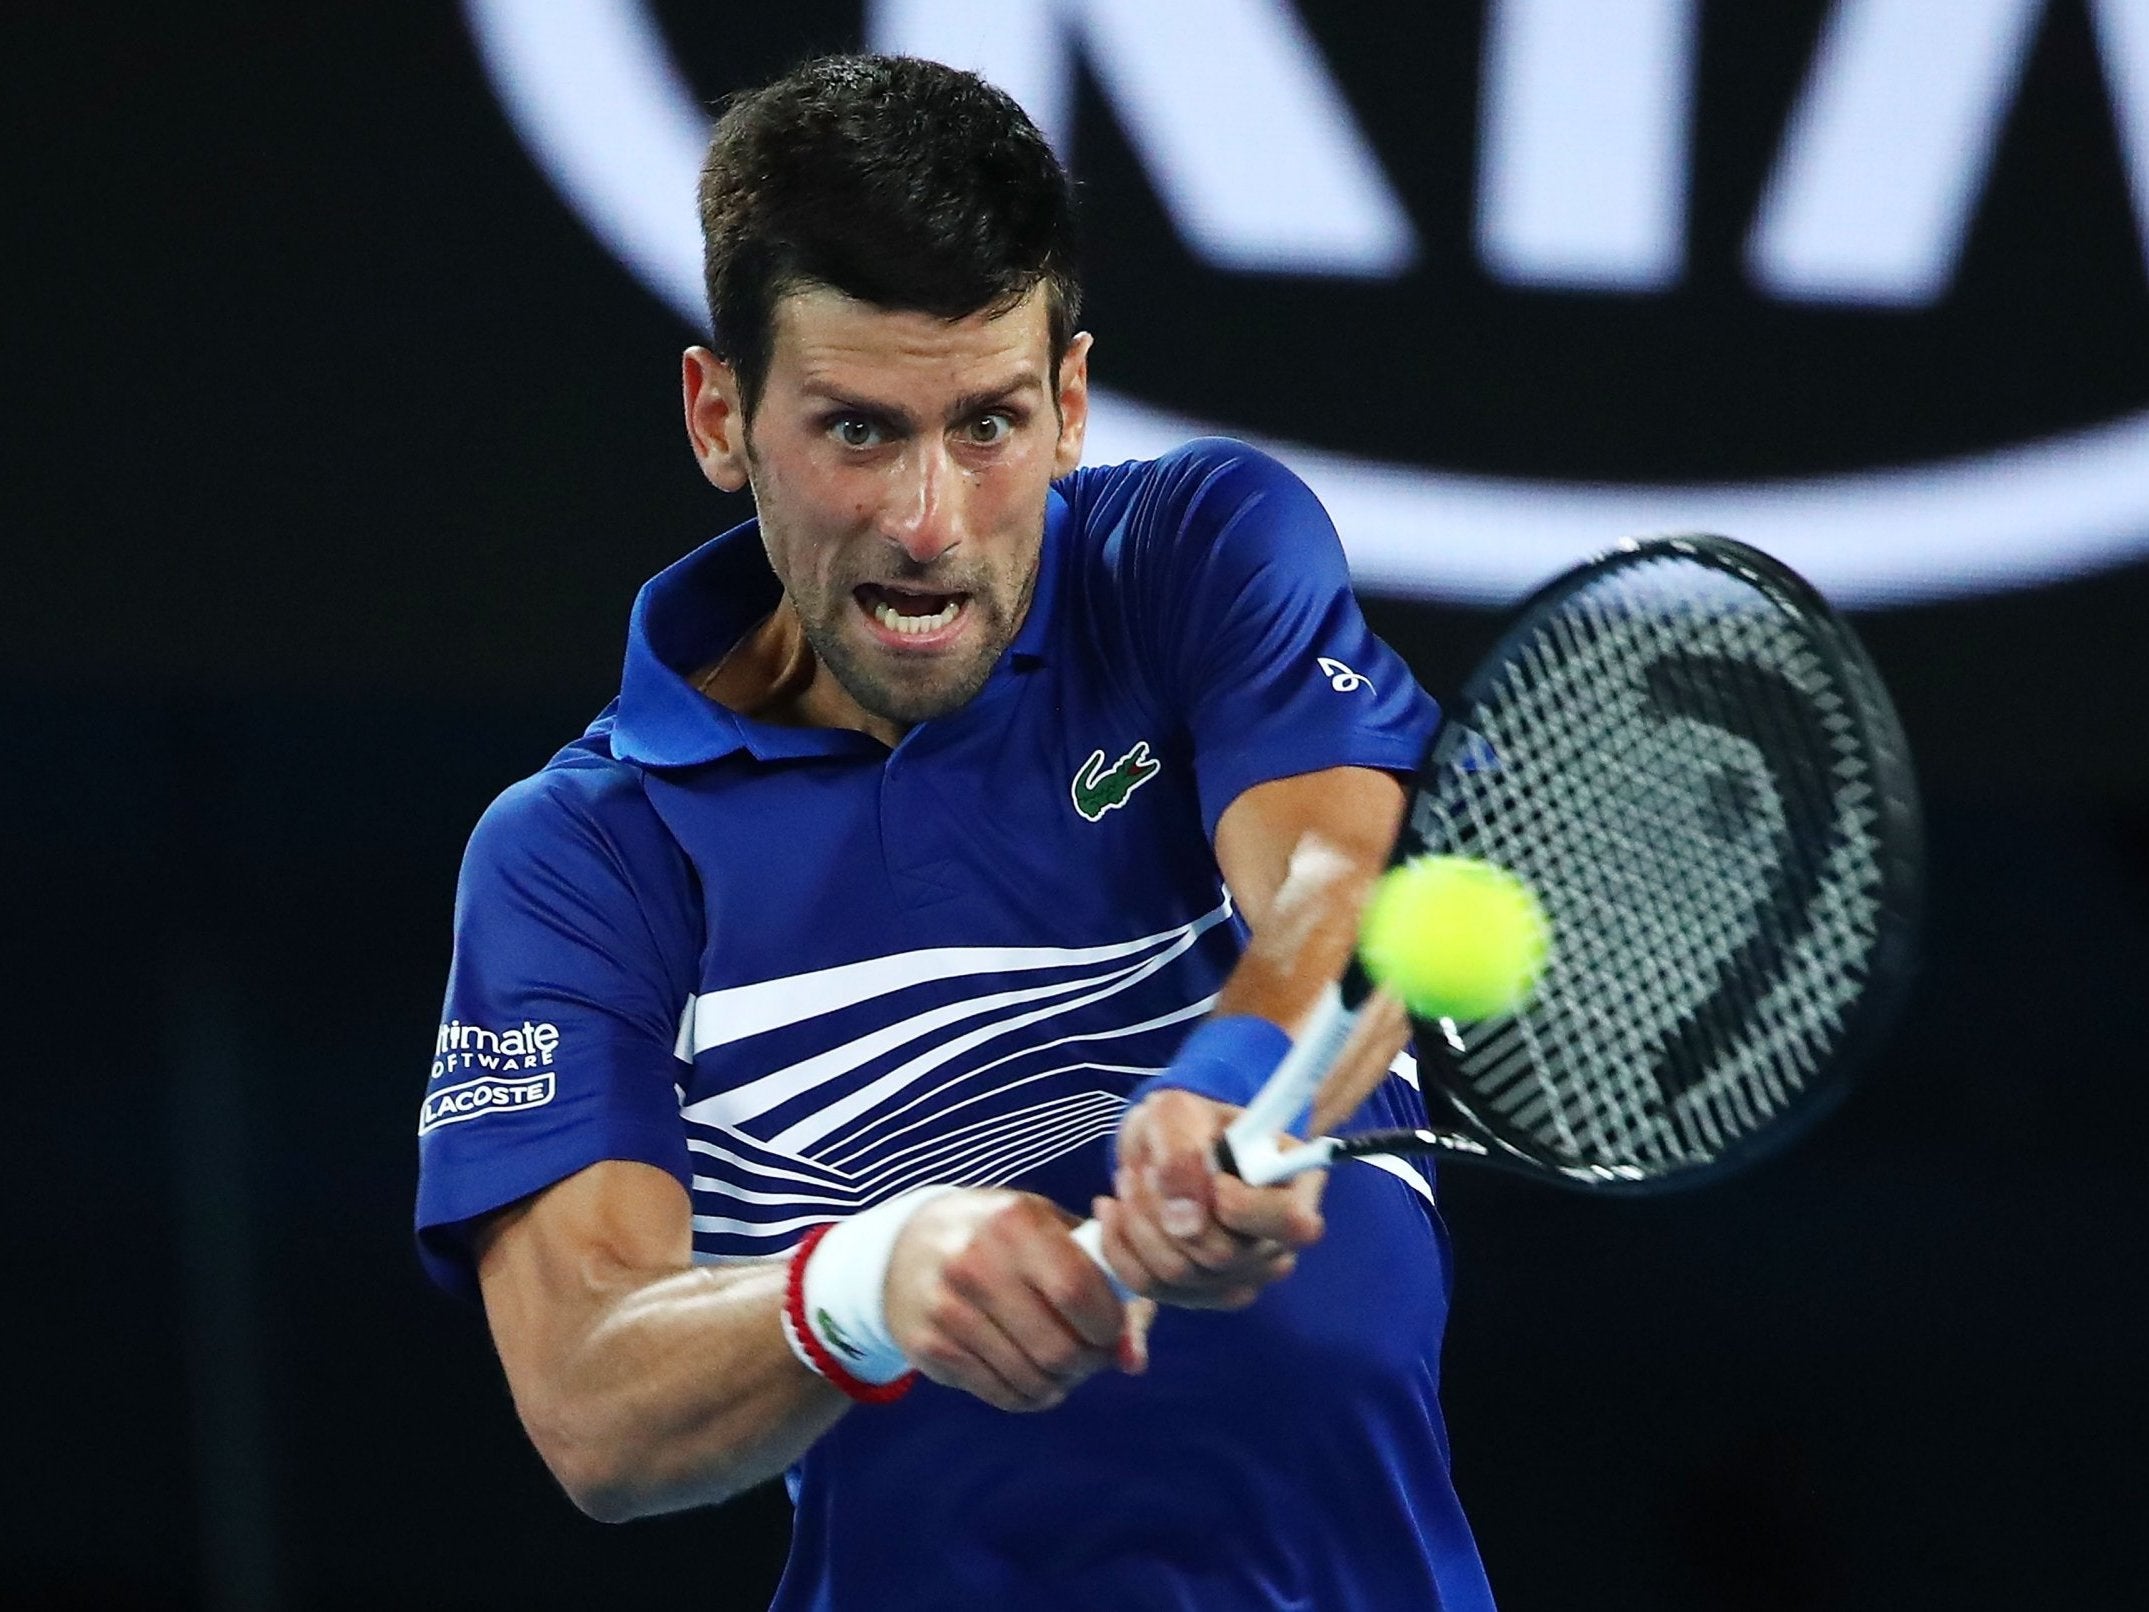 Novak Djokovic is into the quarter-finals of the Australian Open (Getty Images)